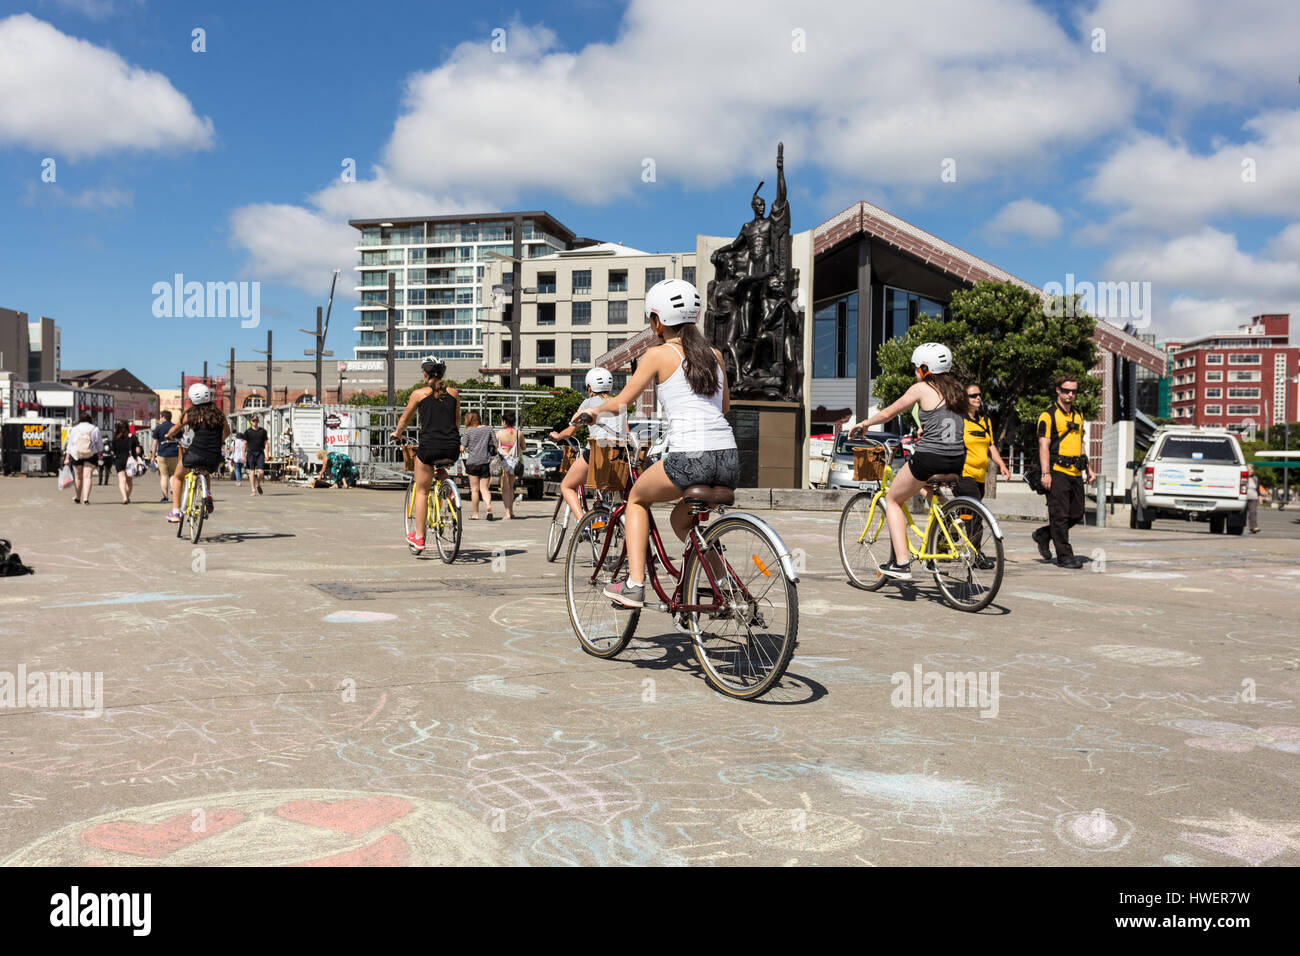 WELLINGTON, NEW ZEALAND - MARCH 2, 2017: Yound girls ride biclycles on the Wellington waterfront promenade on a sunny summer day in New Zealand capita Stock Photo